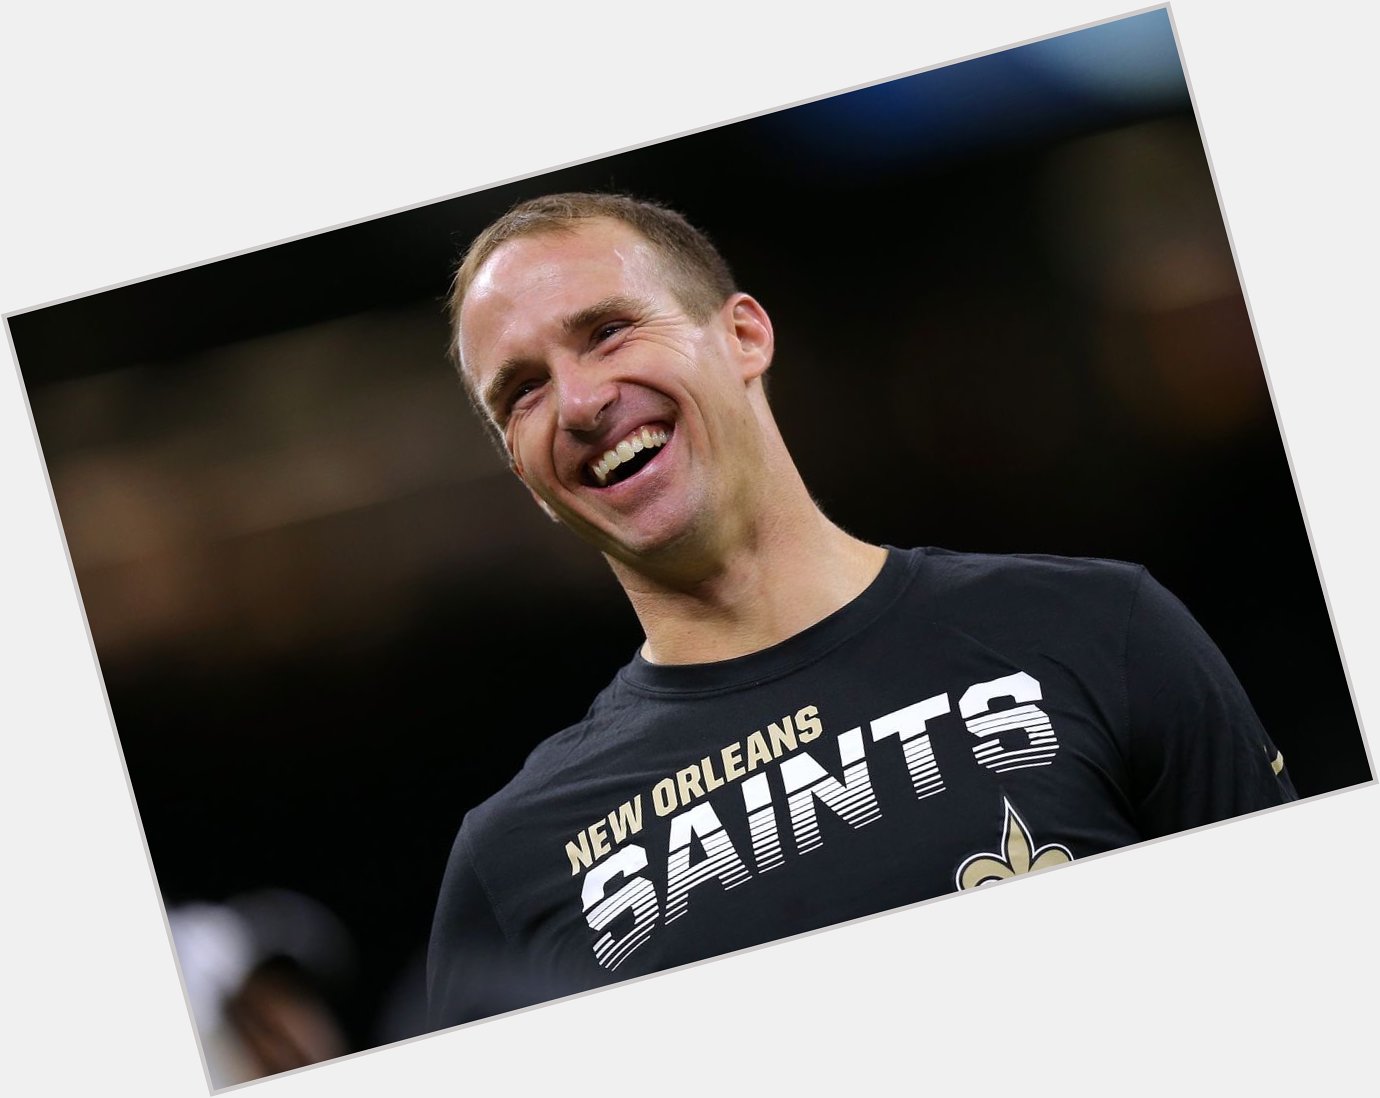 Happy birthday to the REAL of the NFL - DREW BREES!

I hope your birthday today is a great one! 